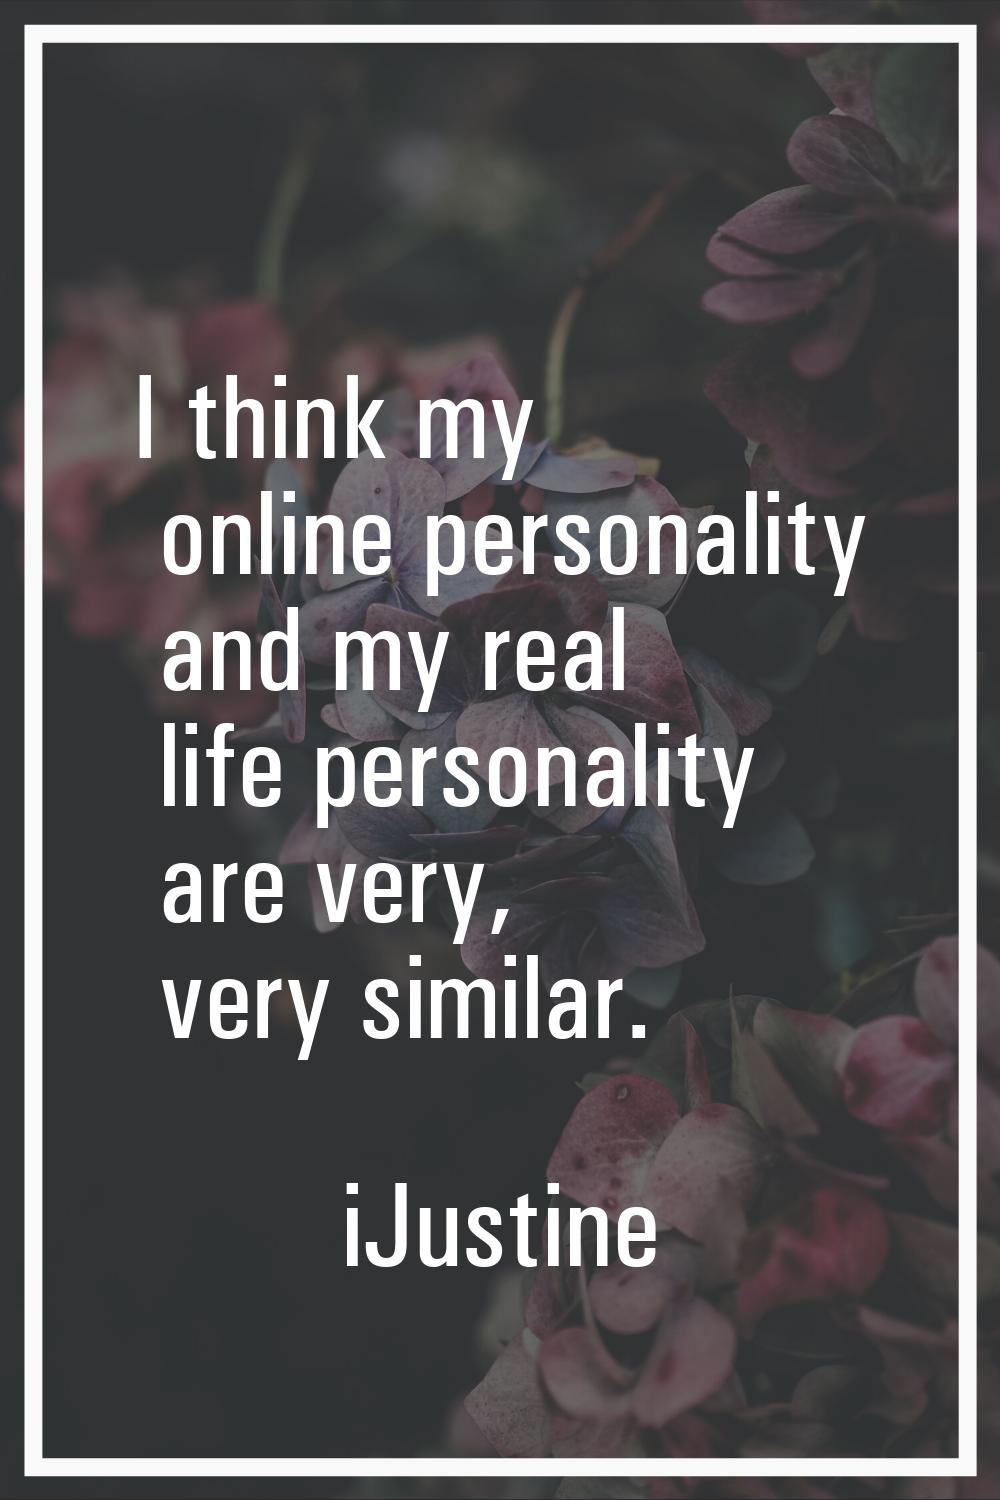 I think my online personality and my real life personality are very, very similar.